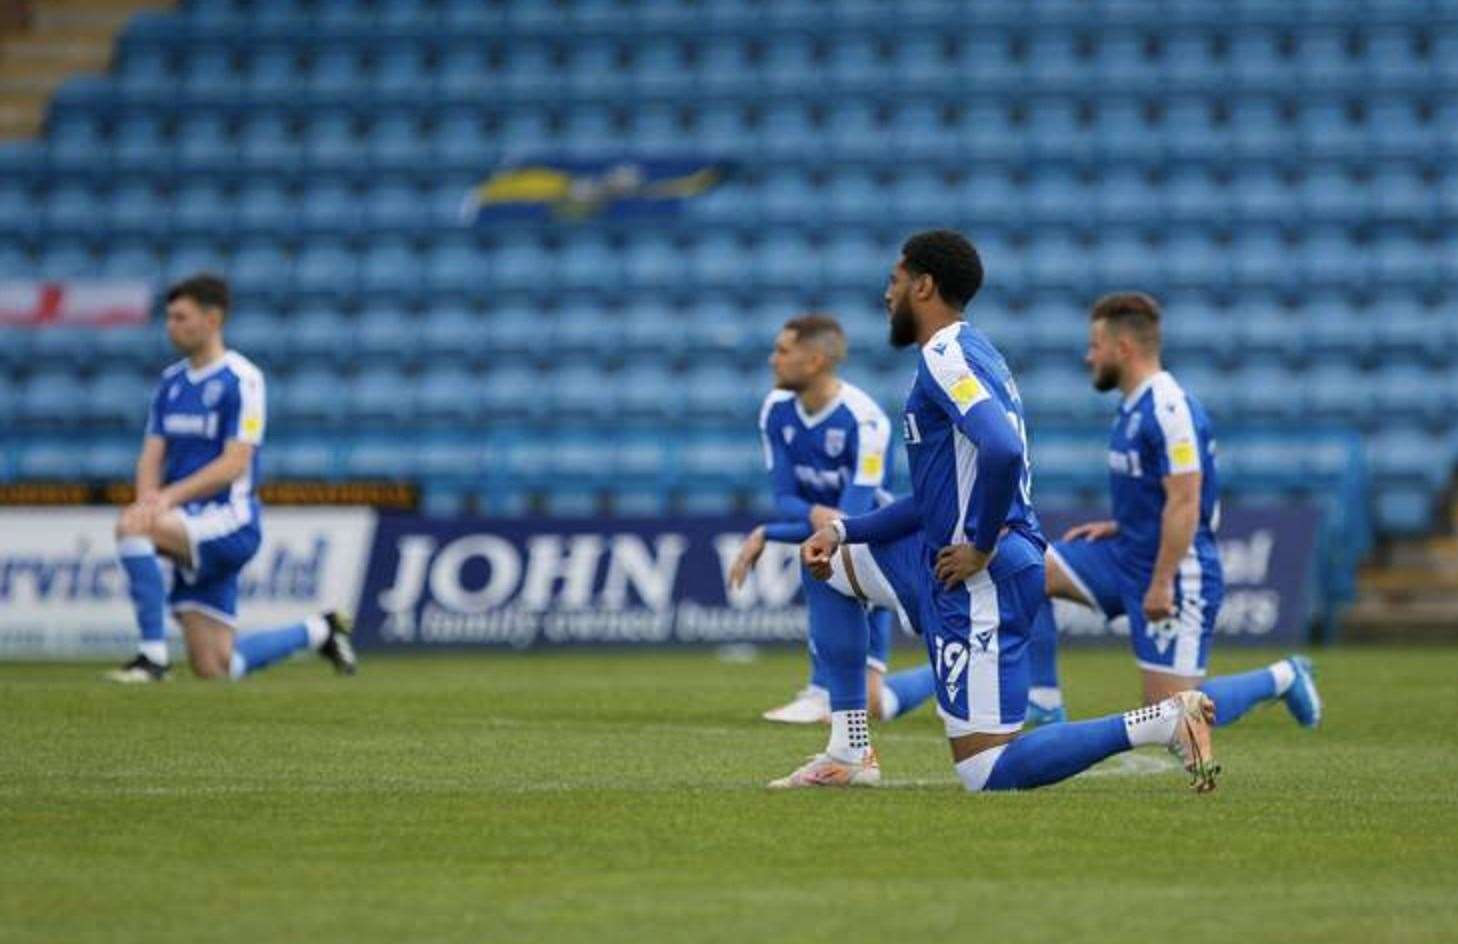 Gillingham FC players take the knee before a match